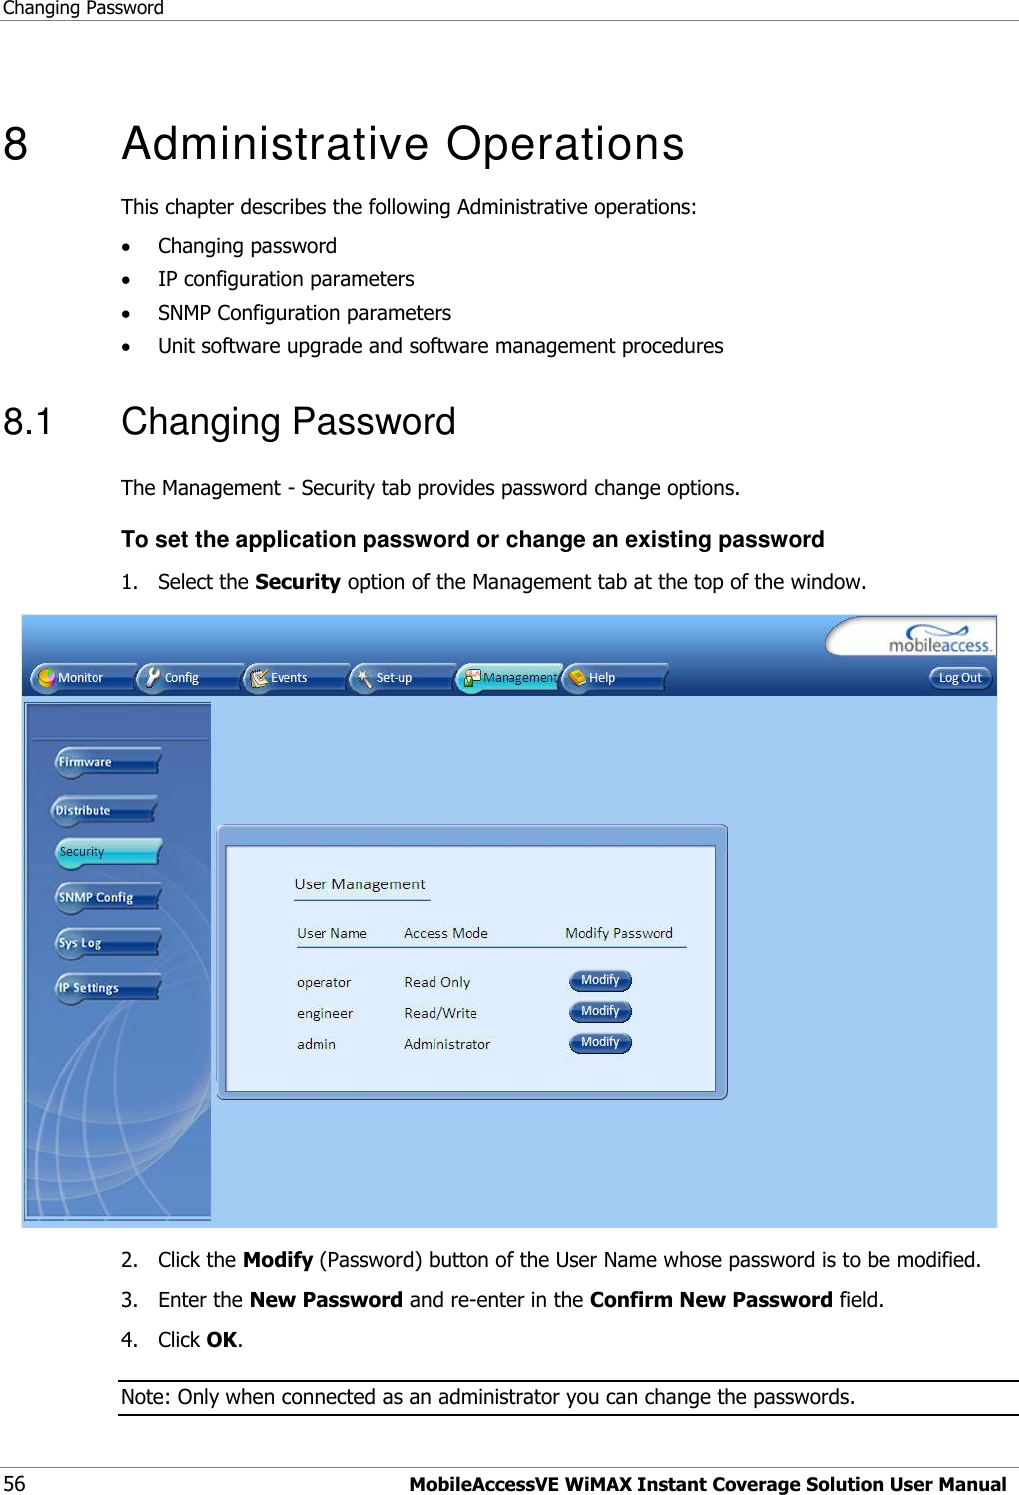 Changing Password 56 MobileAccessVE WiMAX Instant Coverage Solution User Manual  8   Administrative Operations This chapter describes the following Administrative operations:  Changing password  IP configuration parameters  SNMP Configuration parameters  Unit software upgrade and software management procedures 8.1  Changing Password The Management - Security tab provides password change options.  To set the application password or change an existing password 1.  Select the Security option of the Management tab at the top of the window.  2.  Click the Modify (Password) button of the User Name whose password is to be modified.  3.  Enter the New Password and re-enter in the Confirm New Password field. 4.  Click OK. Note: Only when connected as an administrator you can change the passwords. 